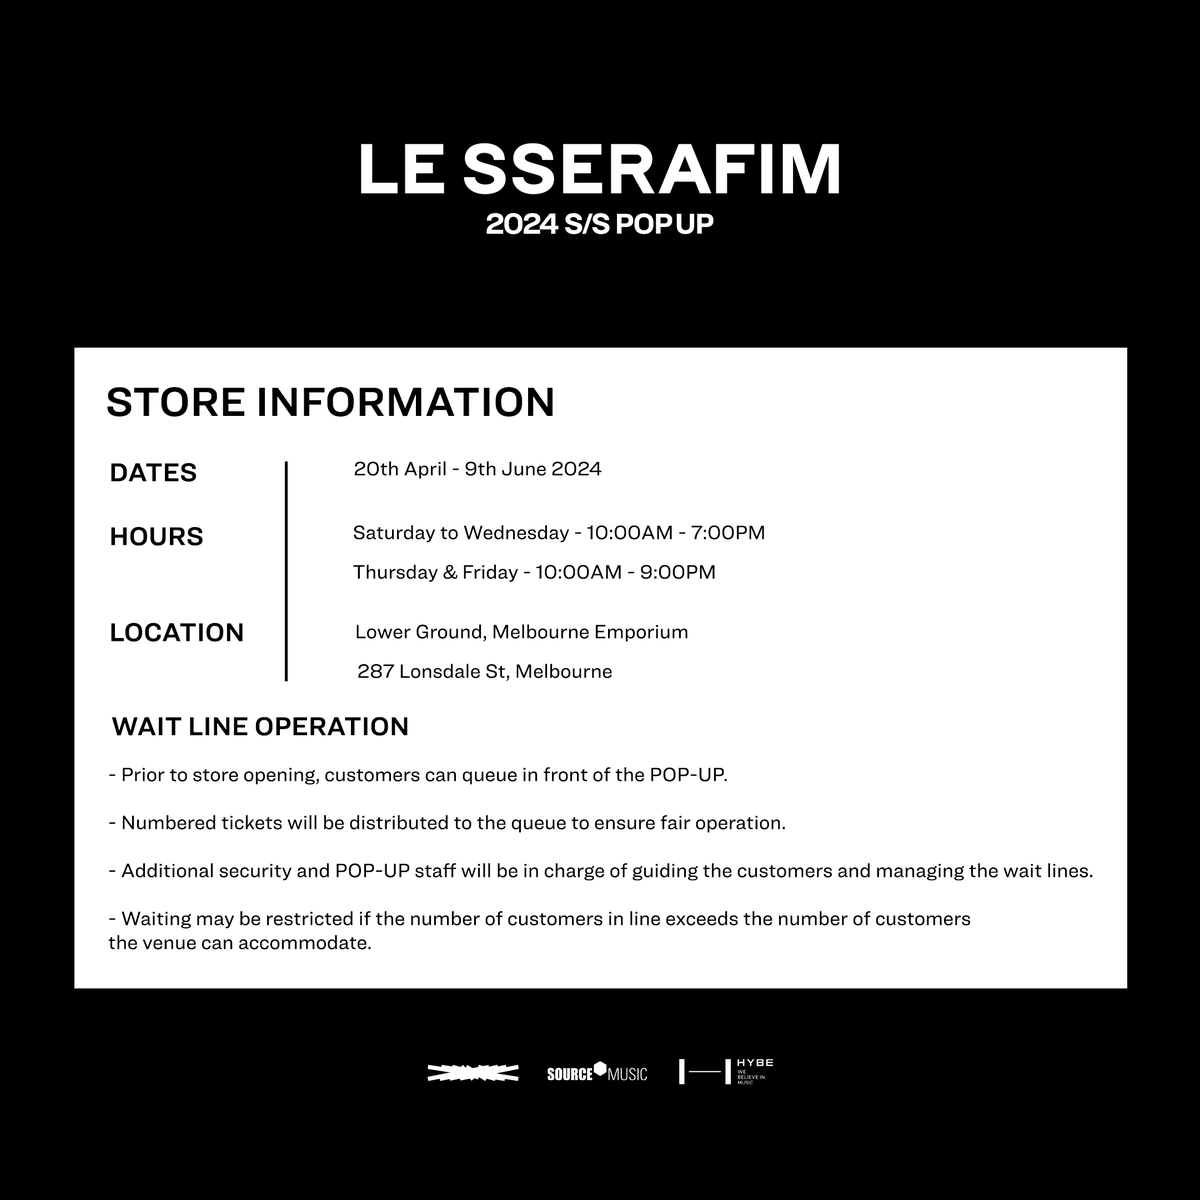 LE SSERAFIM 2024 S/S POP UP IN MELBOURE Grand Opening Day 🖤 10AM on the 20th April 2024. Lower Ground, Melbourne Emporium. For important information regarding the Grand Opening please refer to the store information guide. #LE_SSERAFIM #2024_SS_POPUP #LE_SSERAFIM_EASY